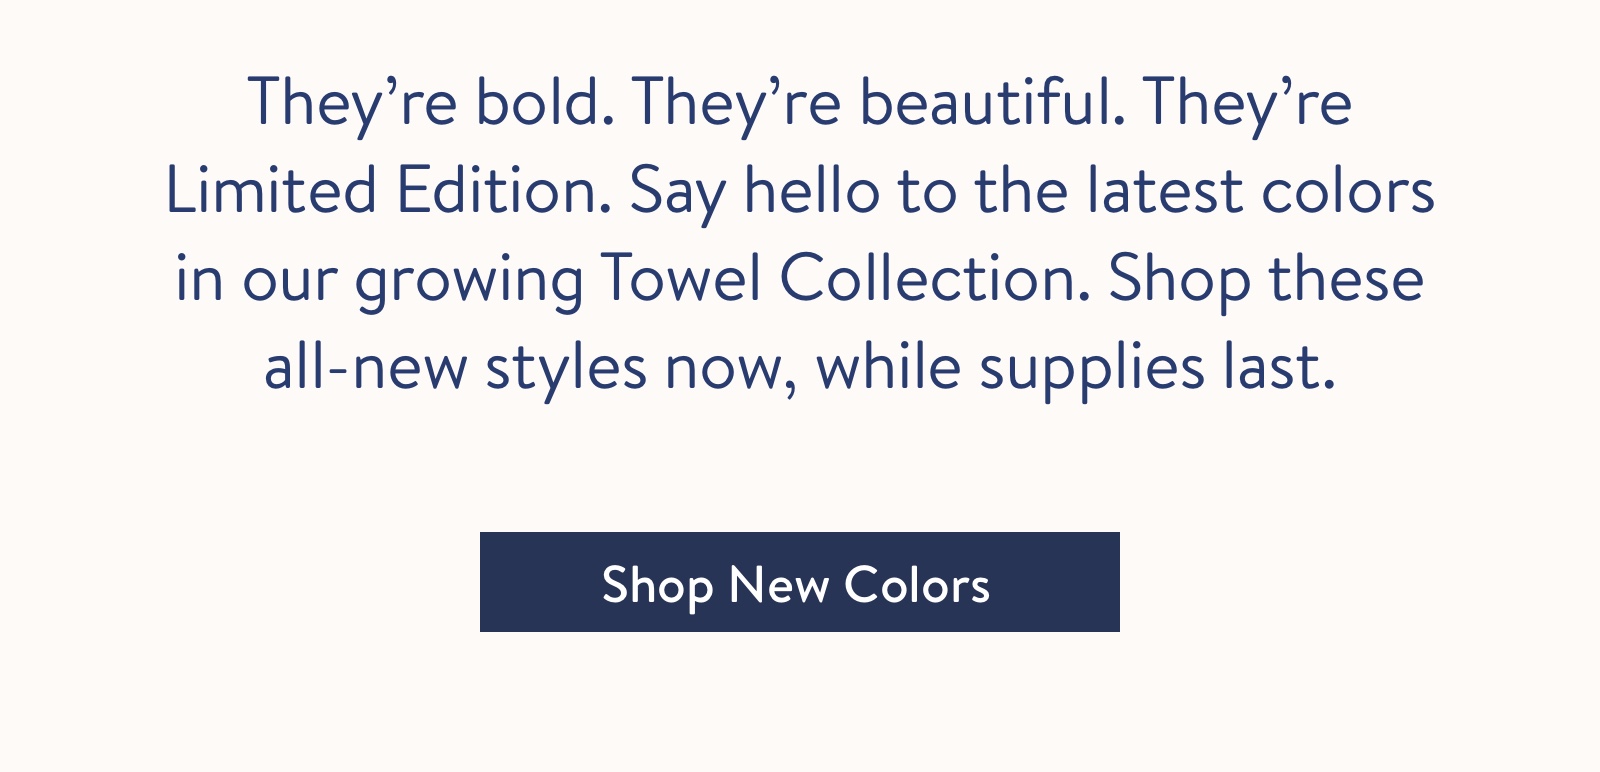 Say hello to the latest colors in our growing Towel Collection.